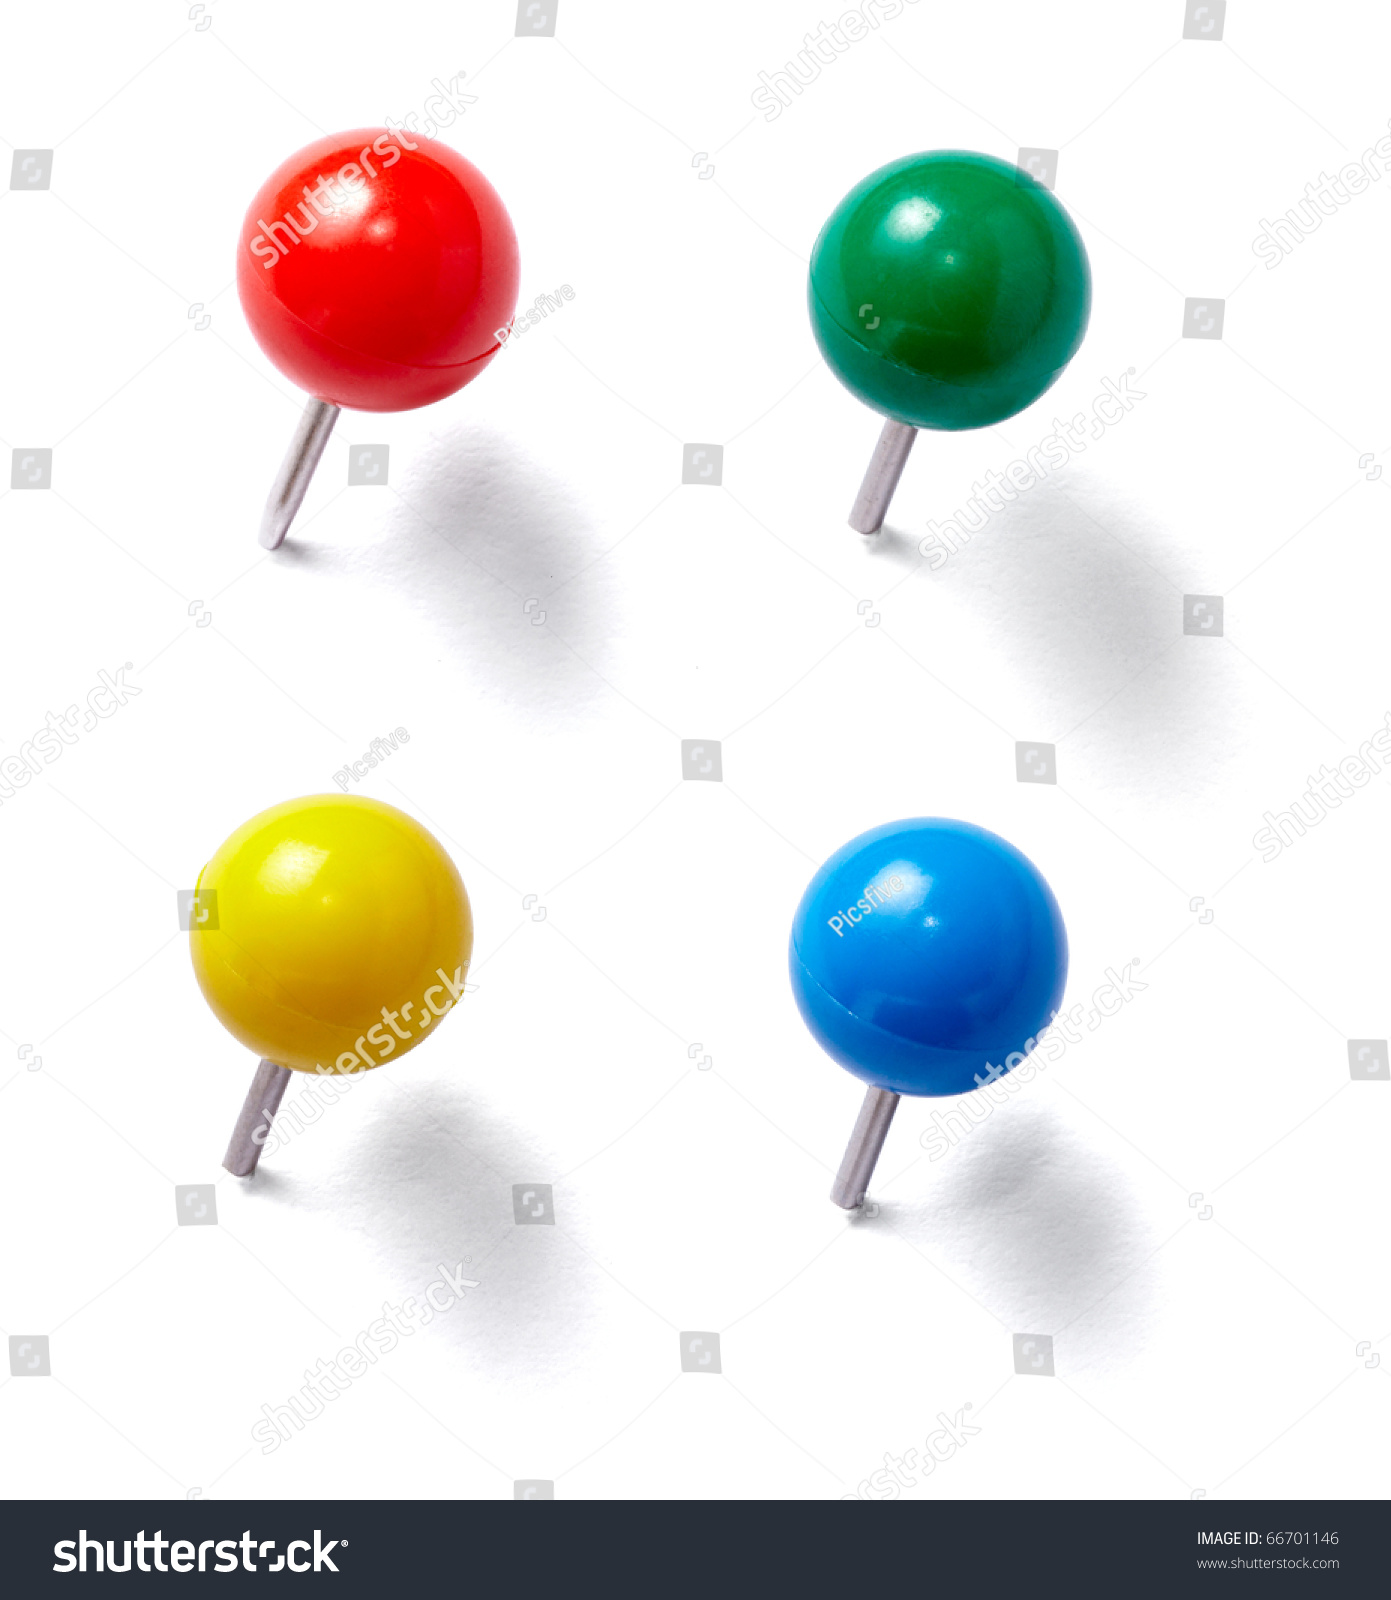 collection of various pushpins on white background. each one is shot separately #66701146